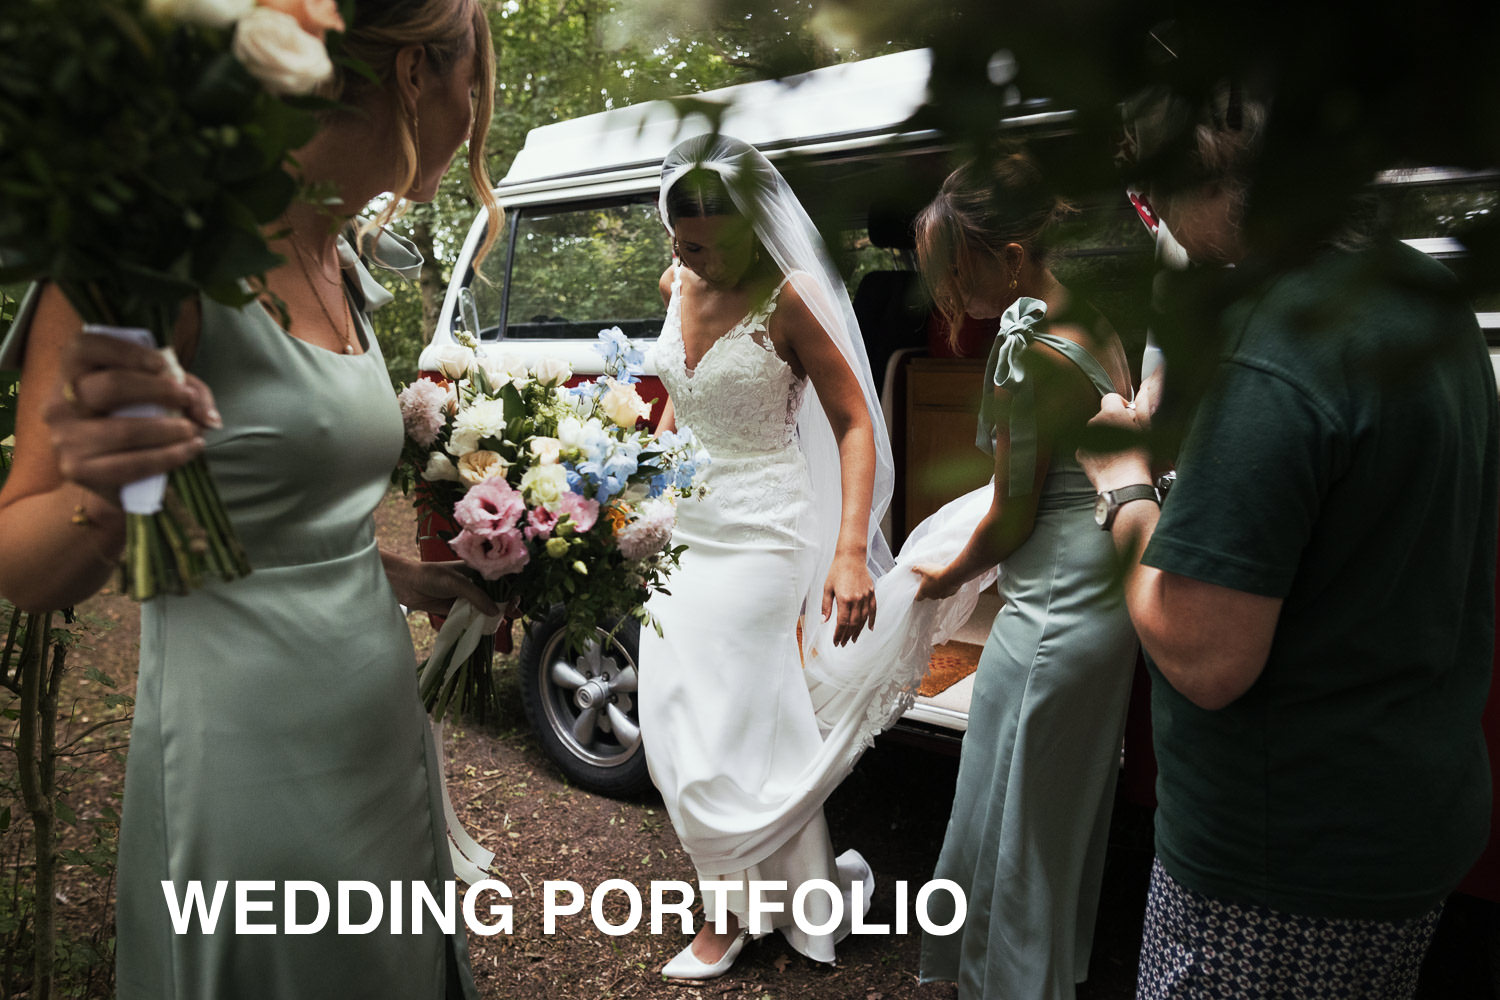 Documentary Wedding Photography Portfolio title section. Bride arrives at the woodland ceremony area in the campervan. Helped by bridesmaids wearing dresses from Oasis. Flowers by Tilly's Floral Designs. Maggie Sottero Baxley dress.